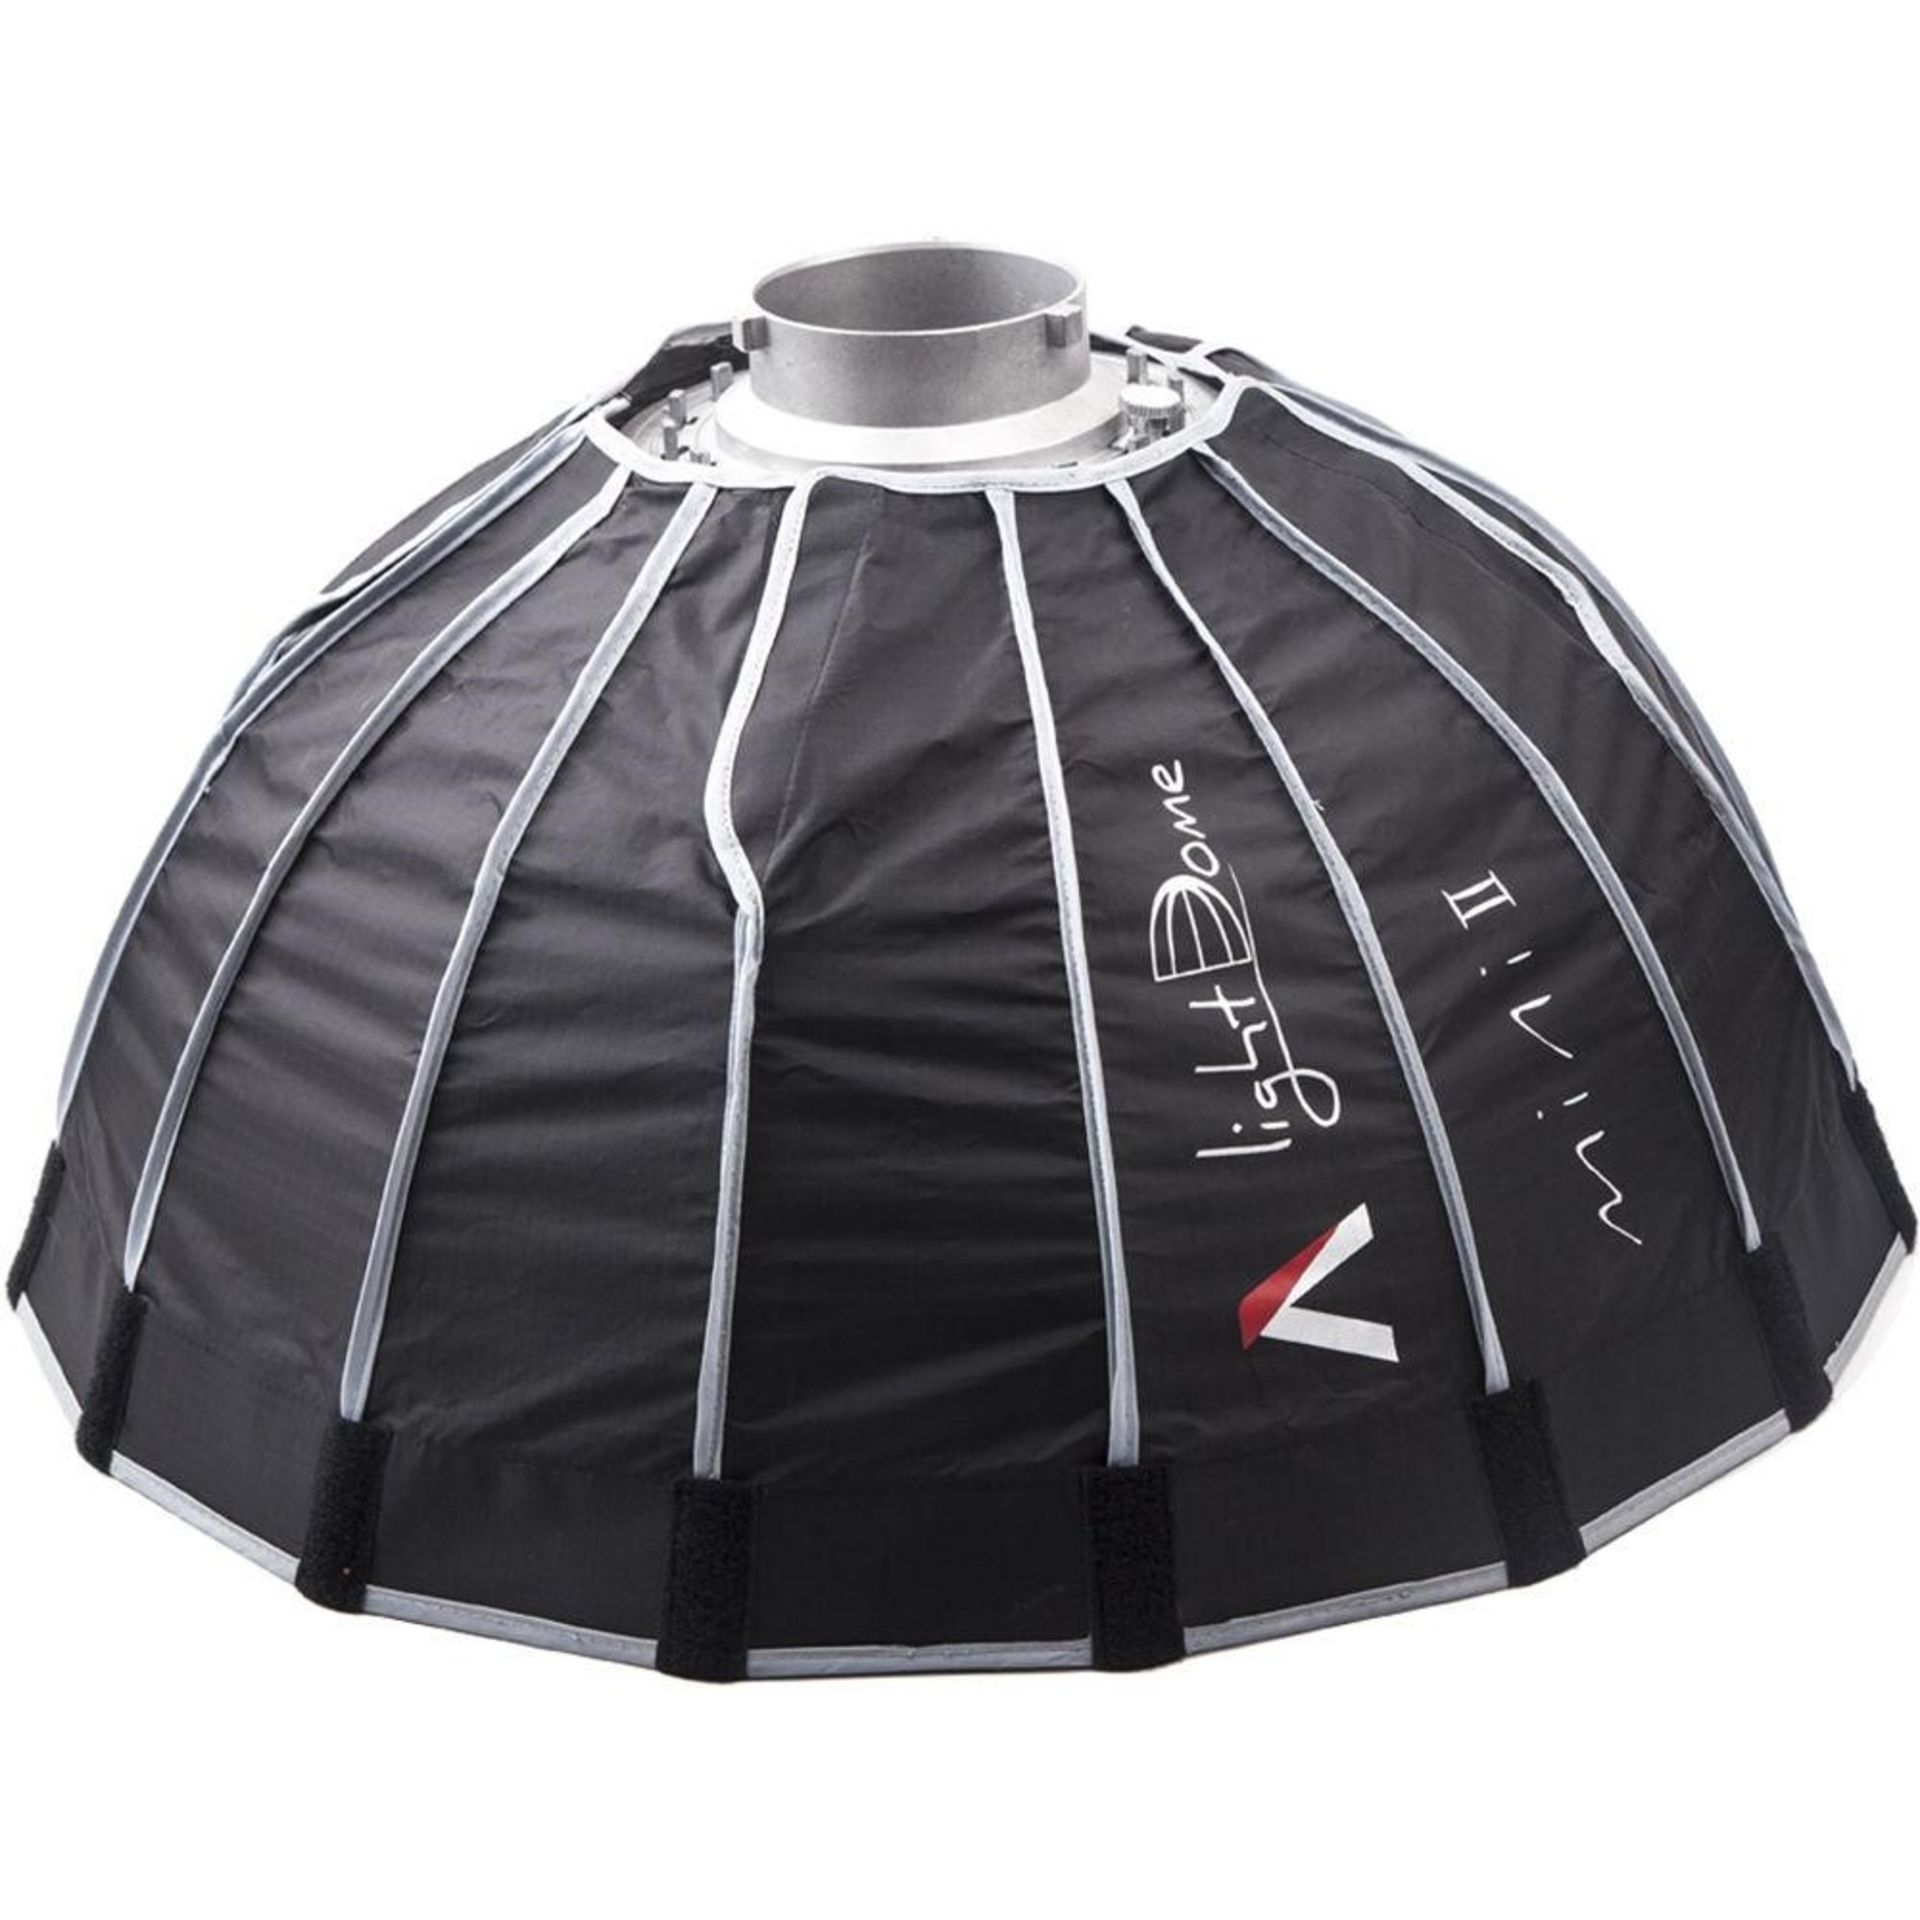 APATURE LIGHT DOME MINI - IN A CARRY BAG